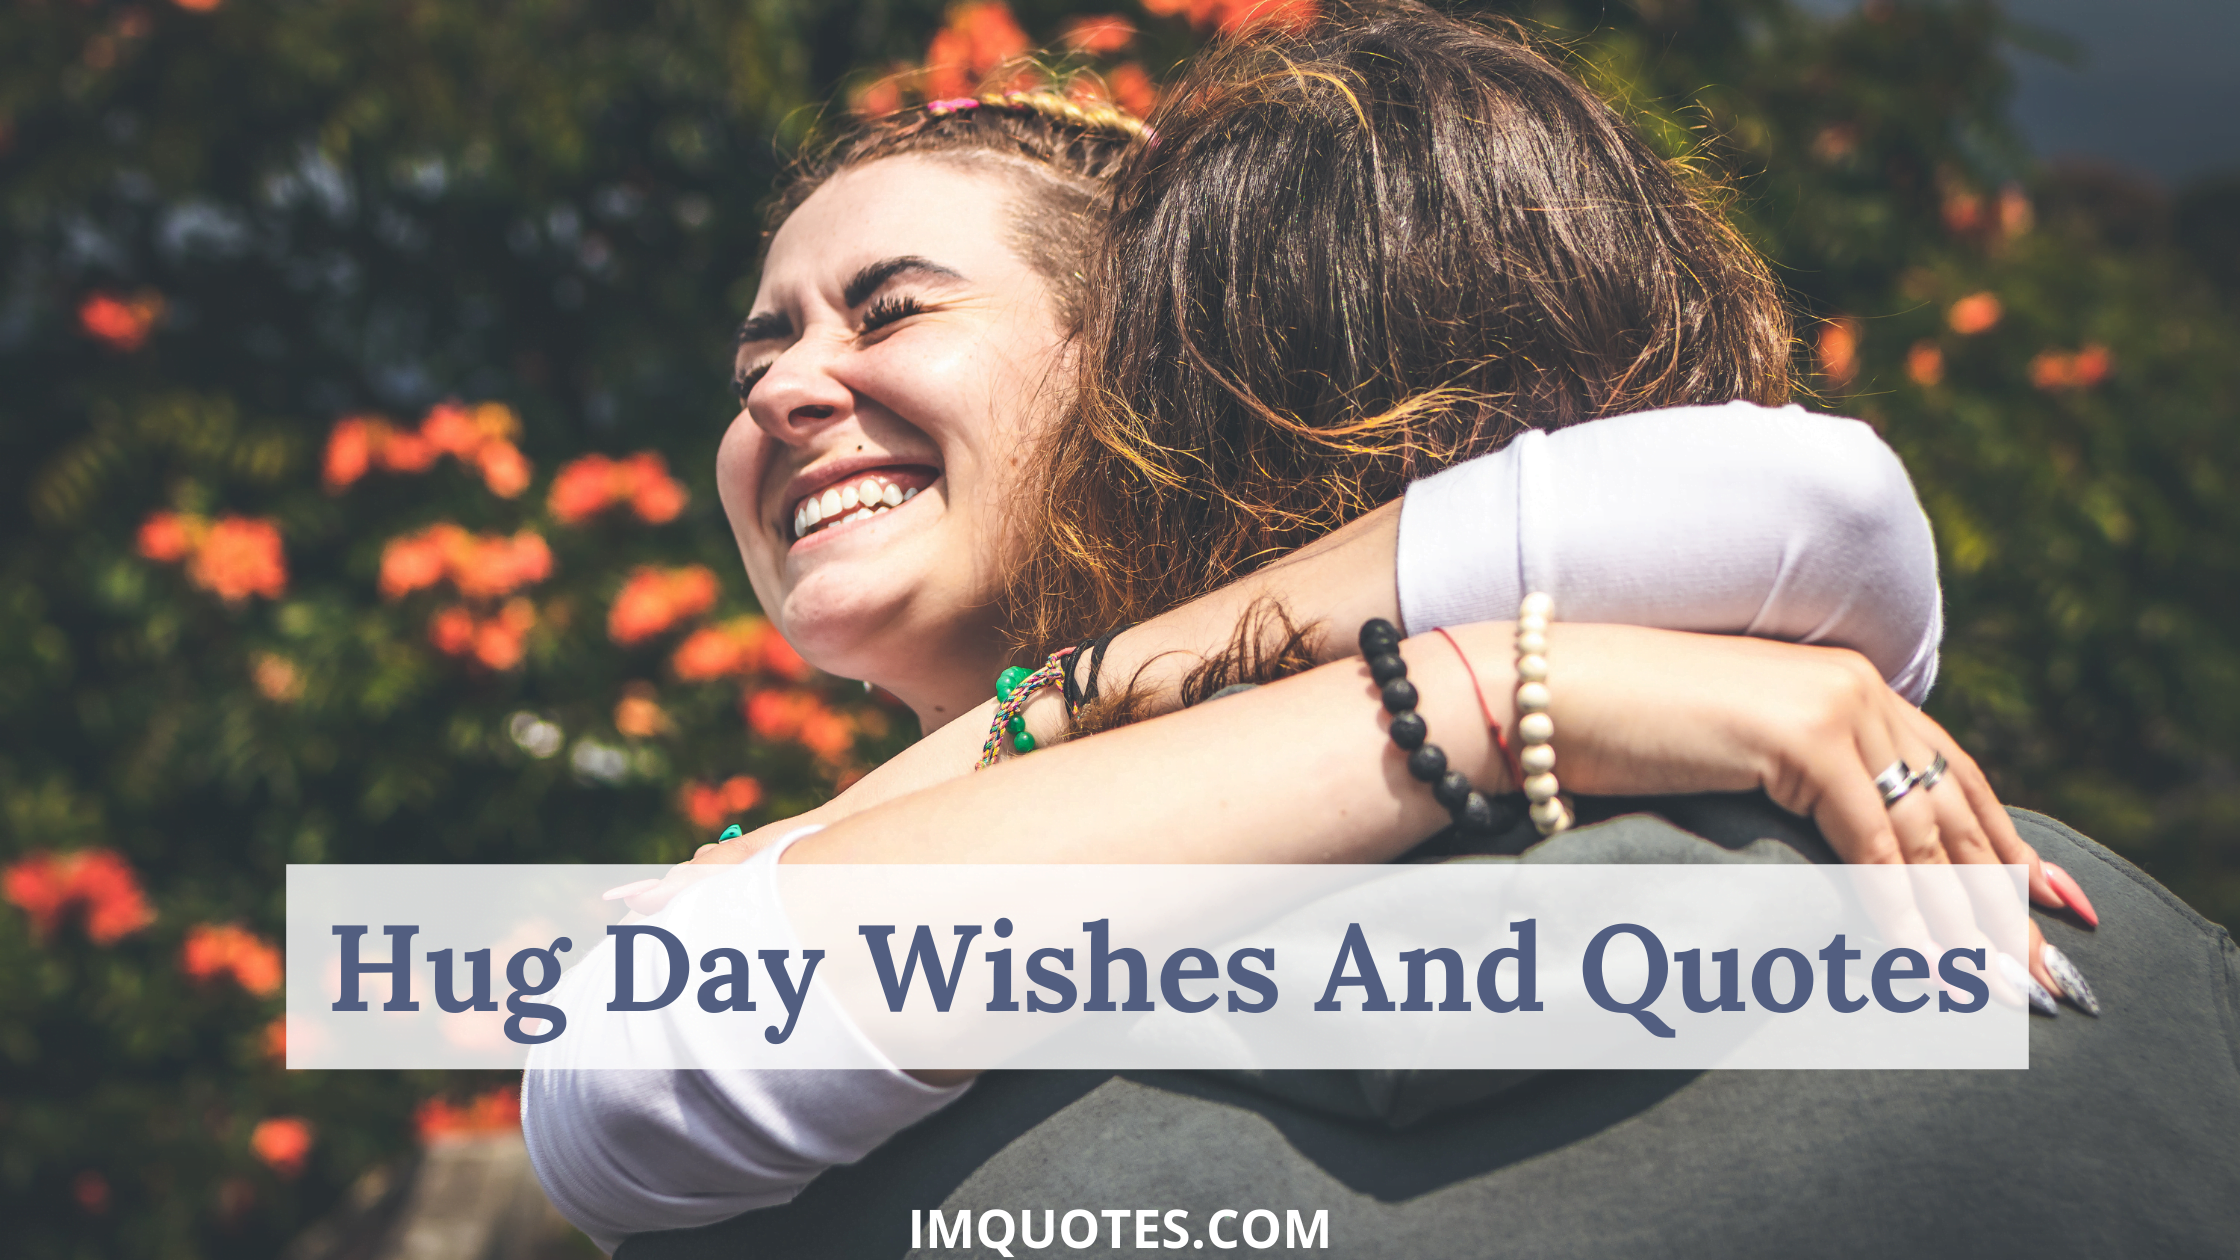 Hug Day Wishes And Quotes1